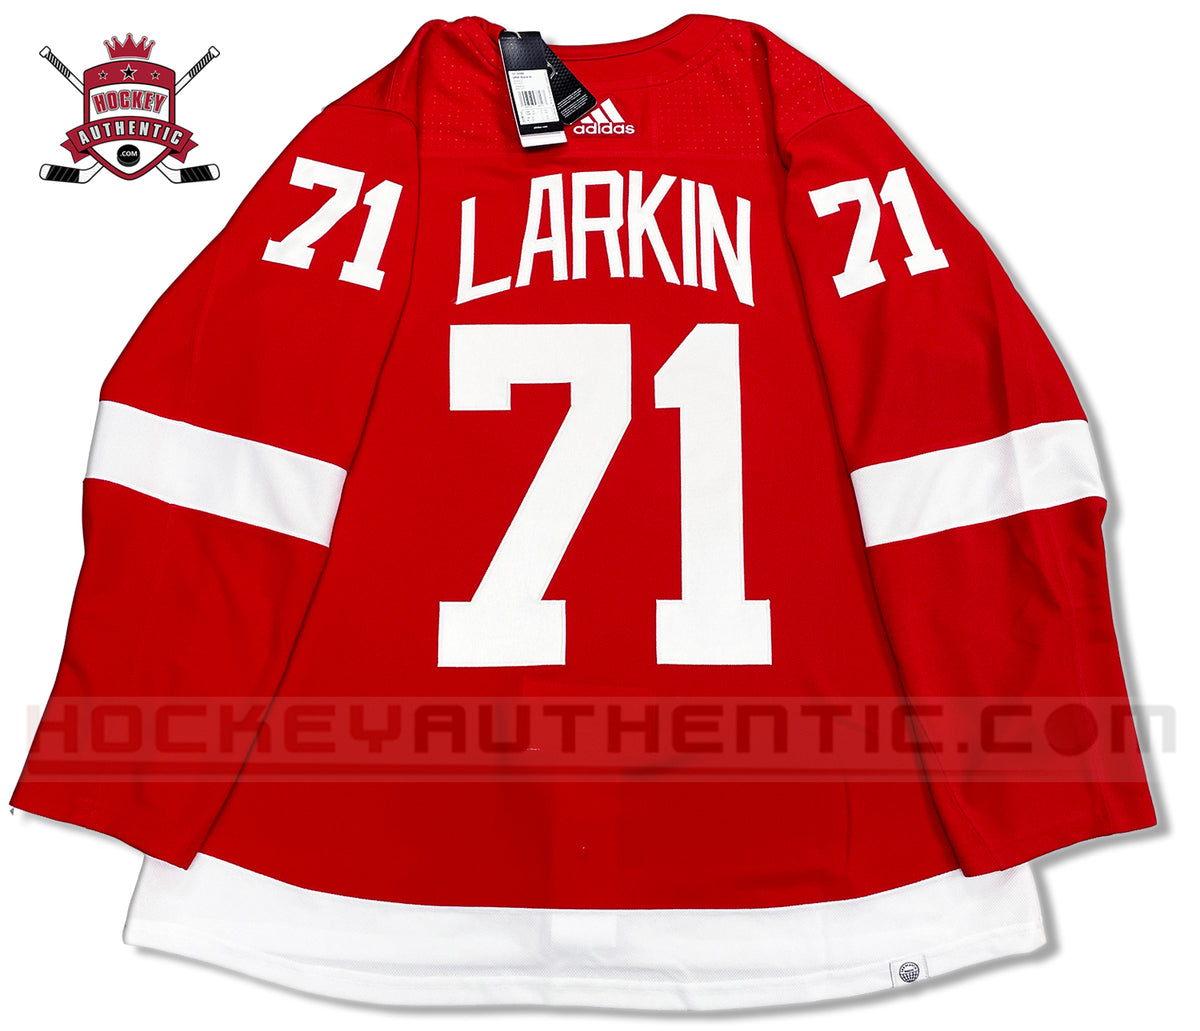 Detroit Red Wings on X: Anyone want a signed Dylan Larkin jersey